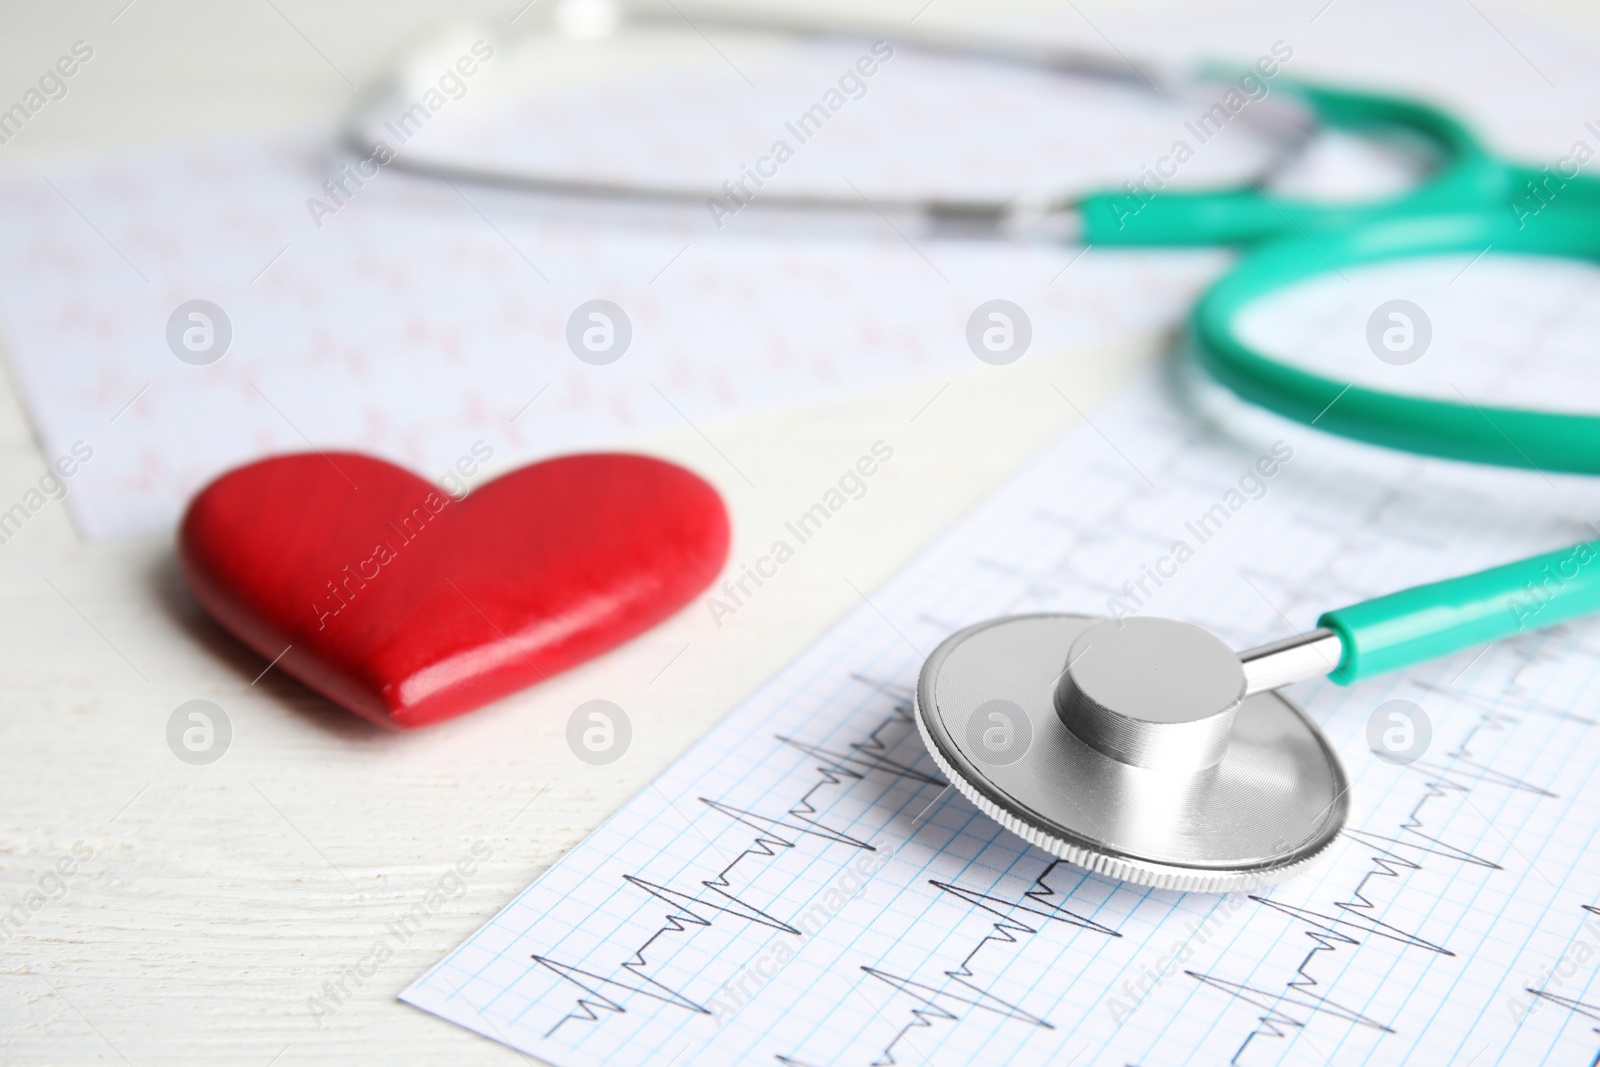 Photo of Stethoscope, red heart and cardiogram on wooden table. Cardiology concept